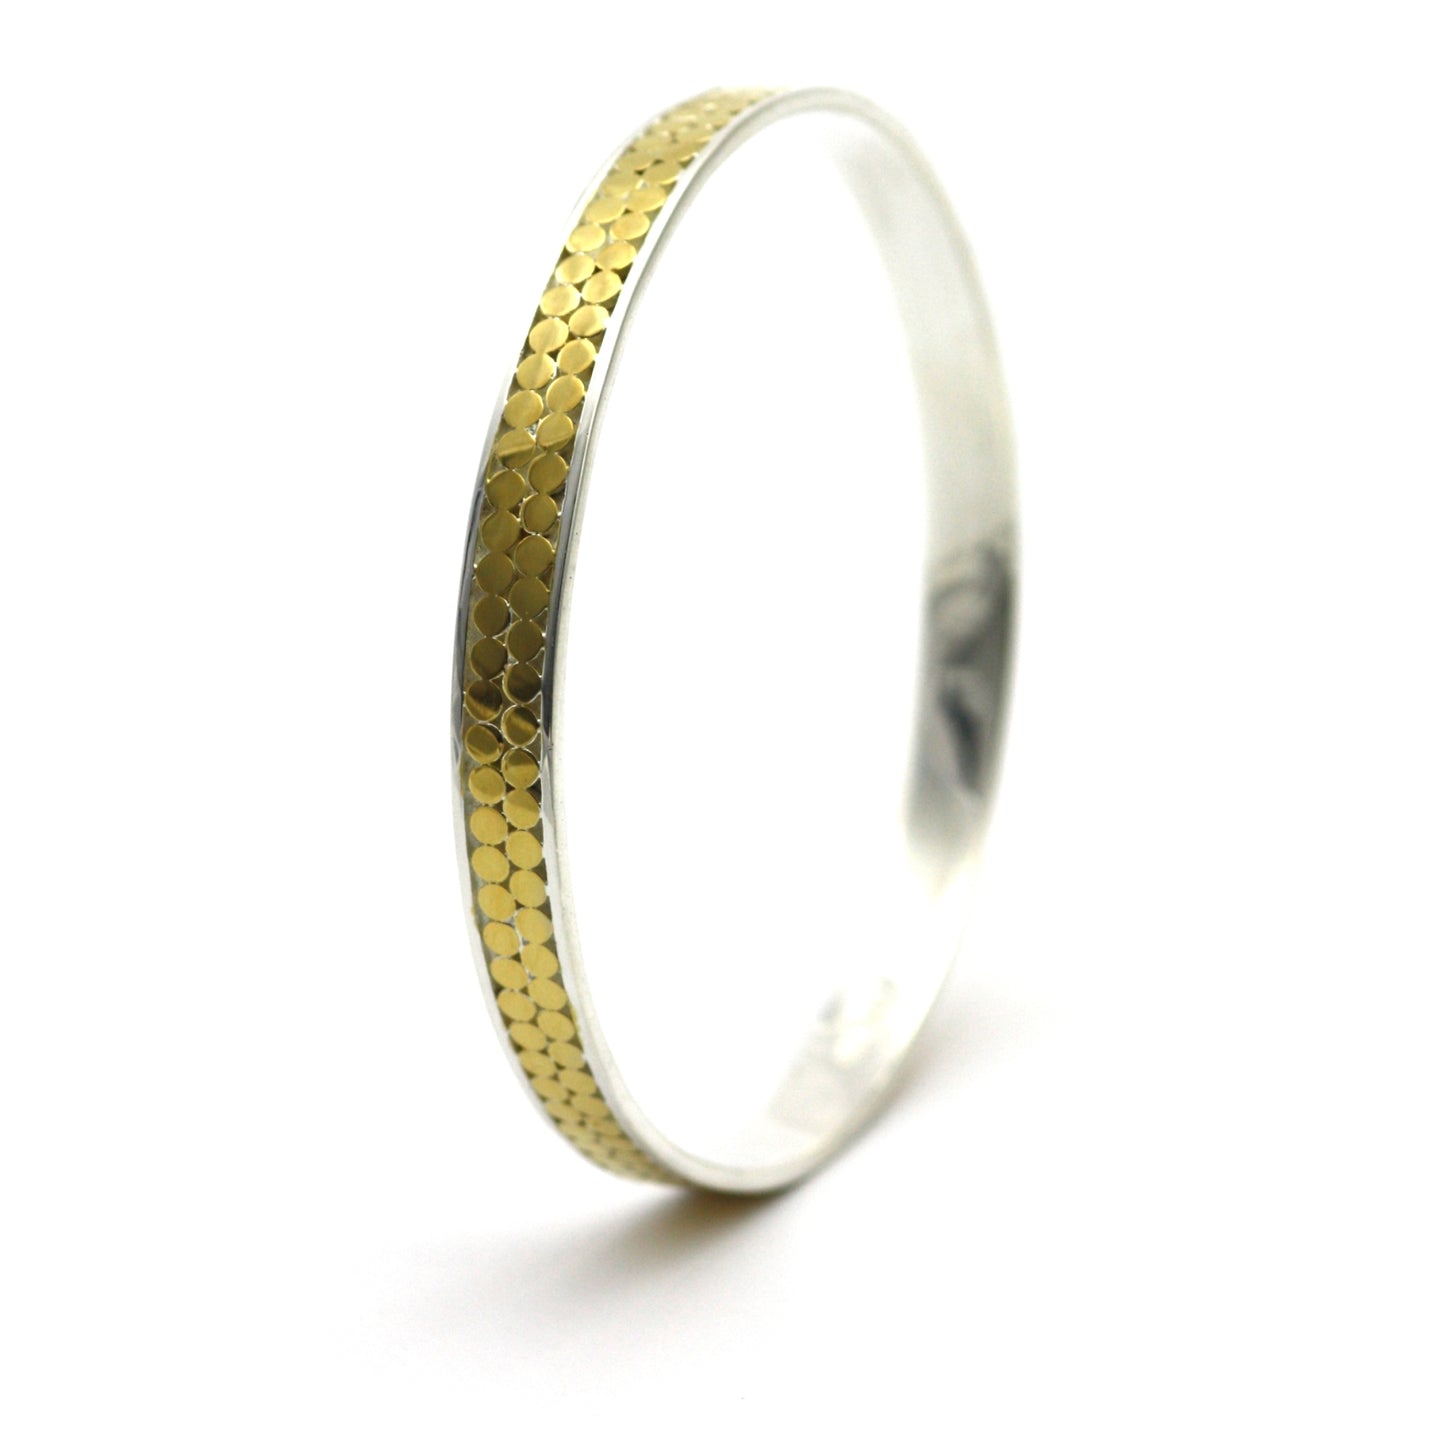 Silver and gold bangle bracelet with two rows of flat dots.